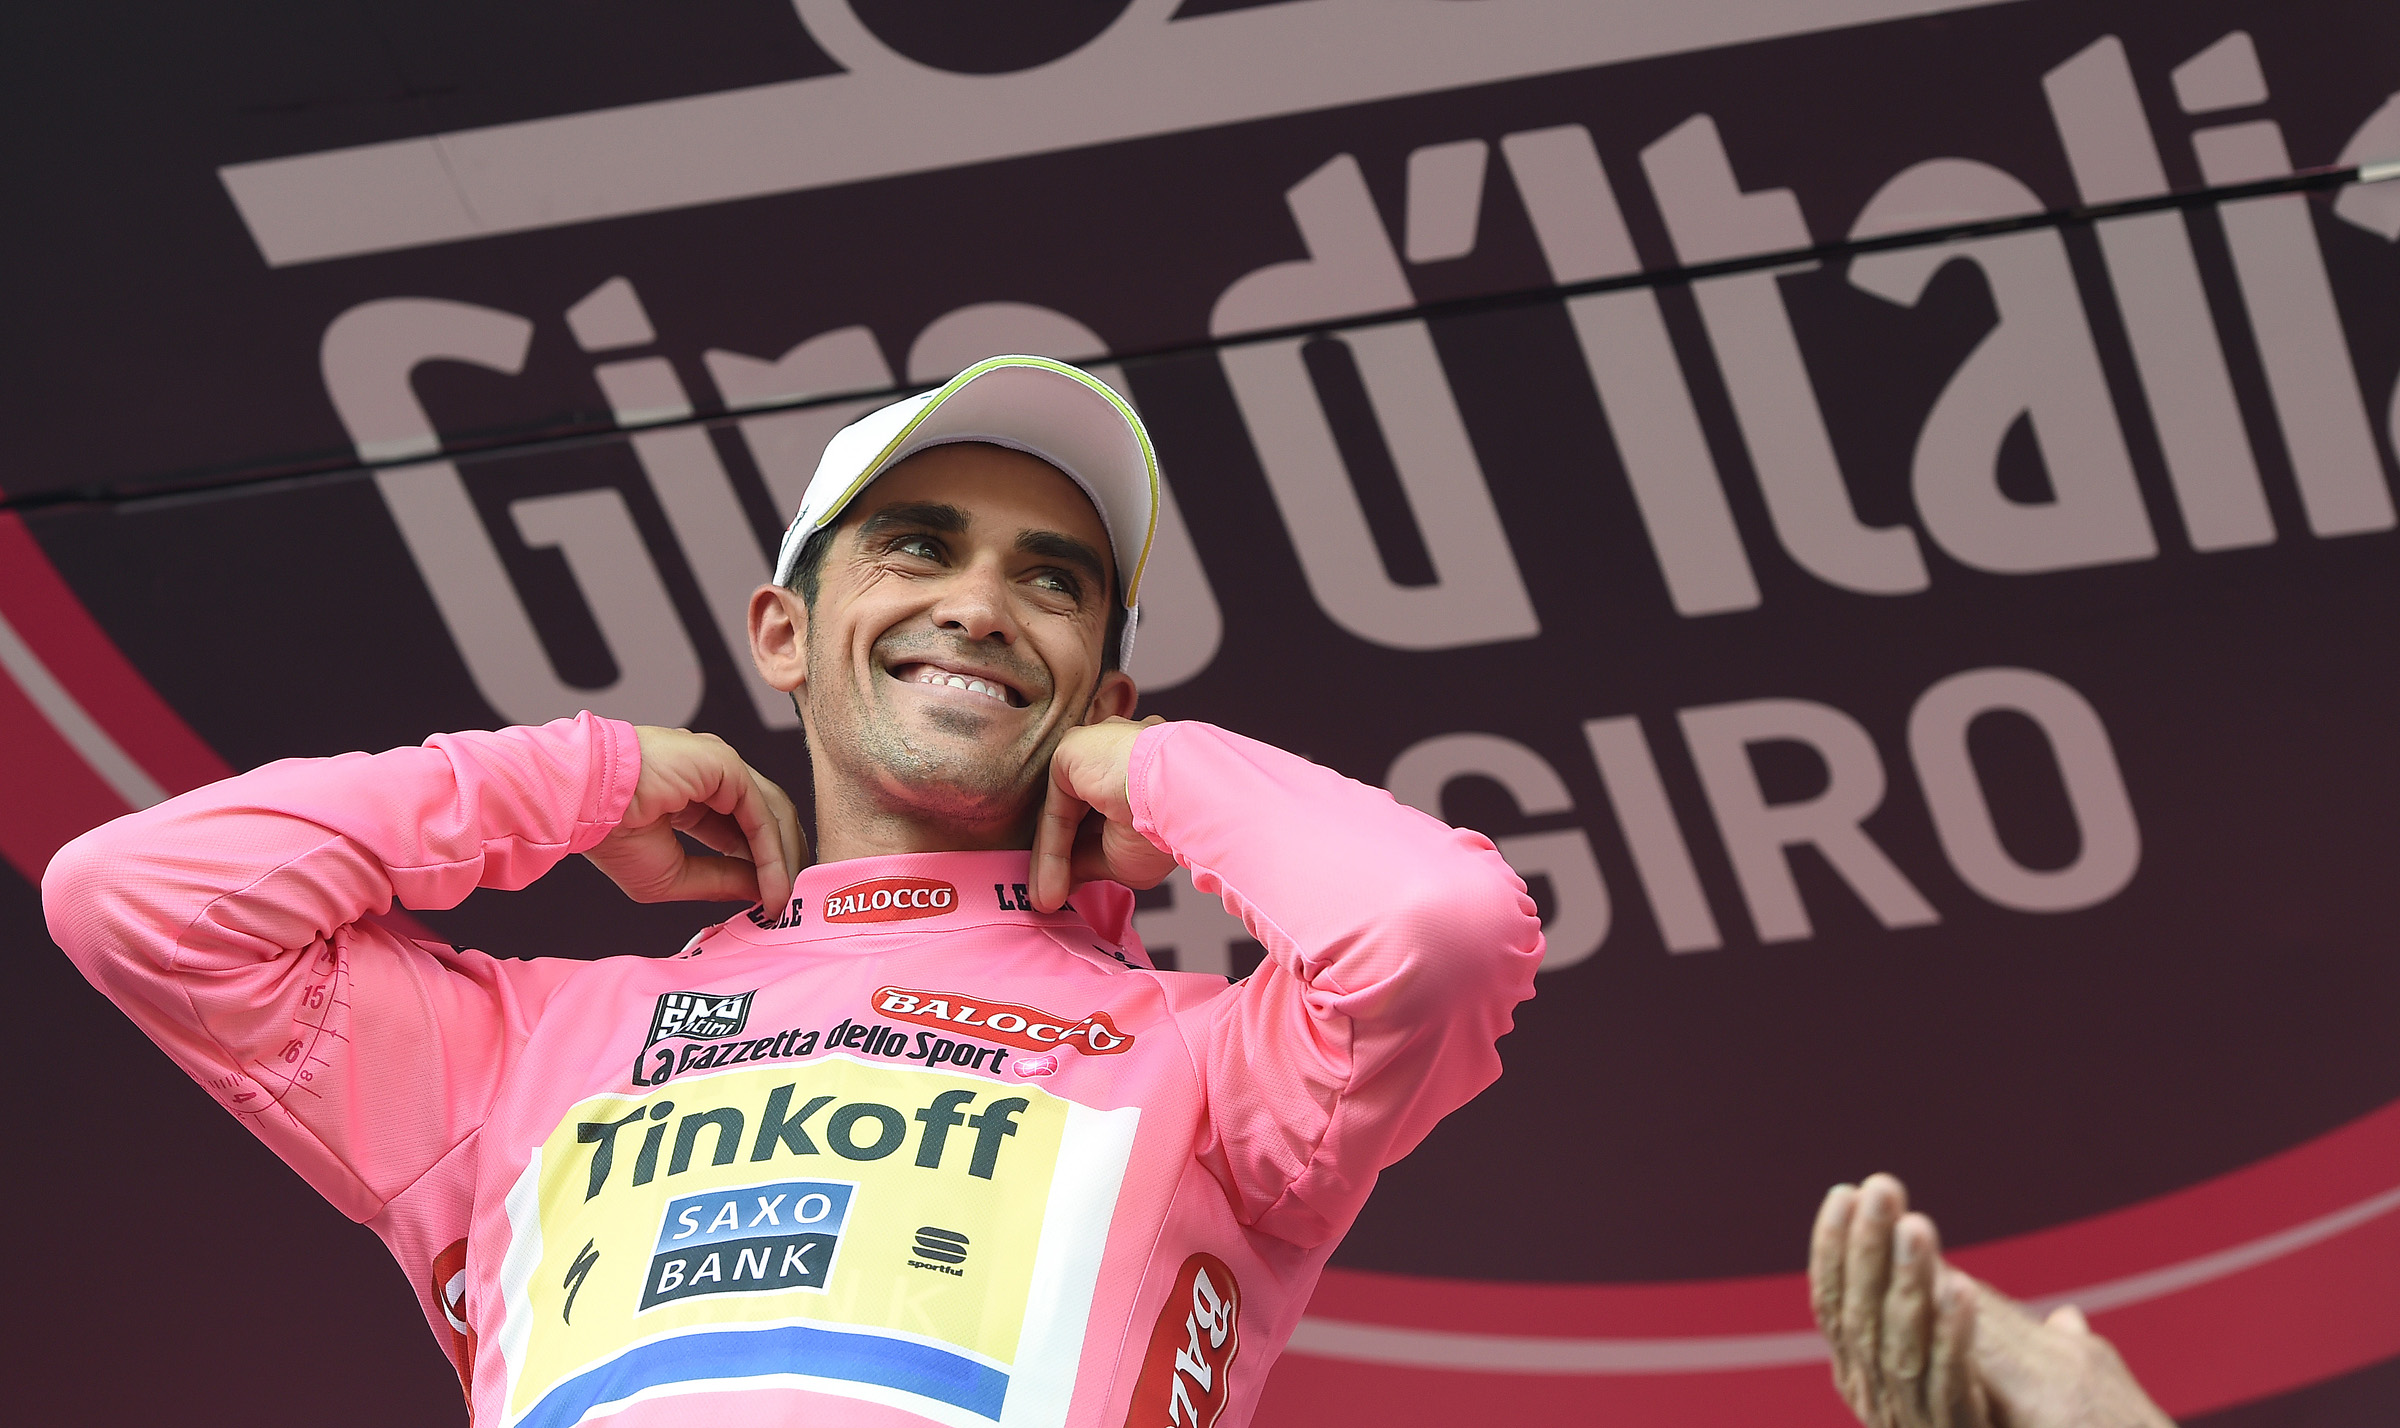 The new overall leader, Spanish rider Alberto Contador of Tinkoff-Saxo team, smiles a s he wears the pink jerseyon the podium of the fifth stage of the 98th Giro d'Italia cycling tour over 152km from La Spezia to Abetone, Italy, 13 May 2015. ANSA/DANIEL DAL ZENNARO